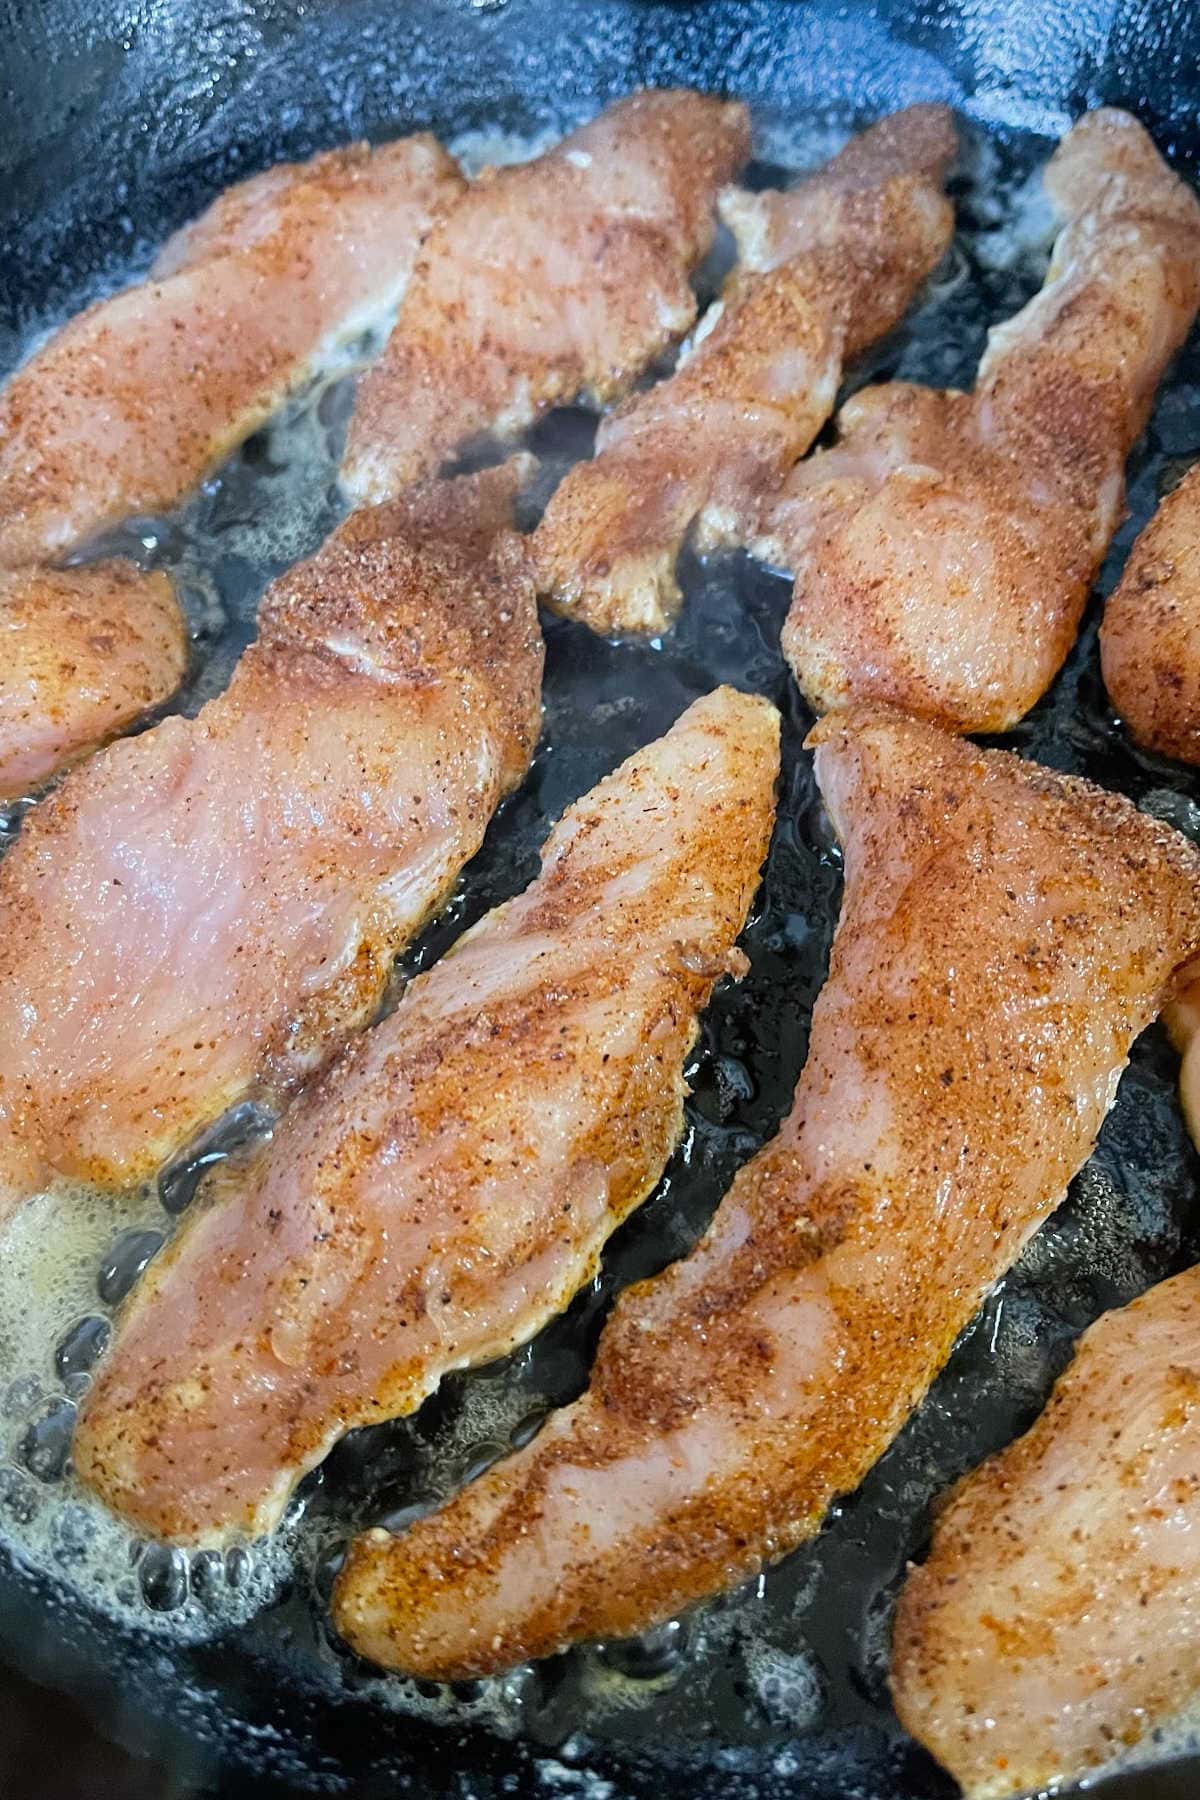 Searing the chicken in a skillet.